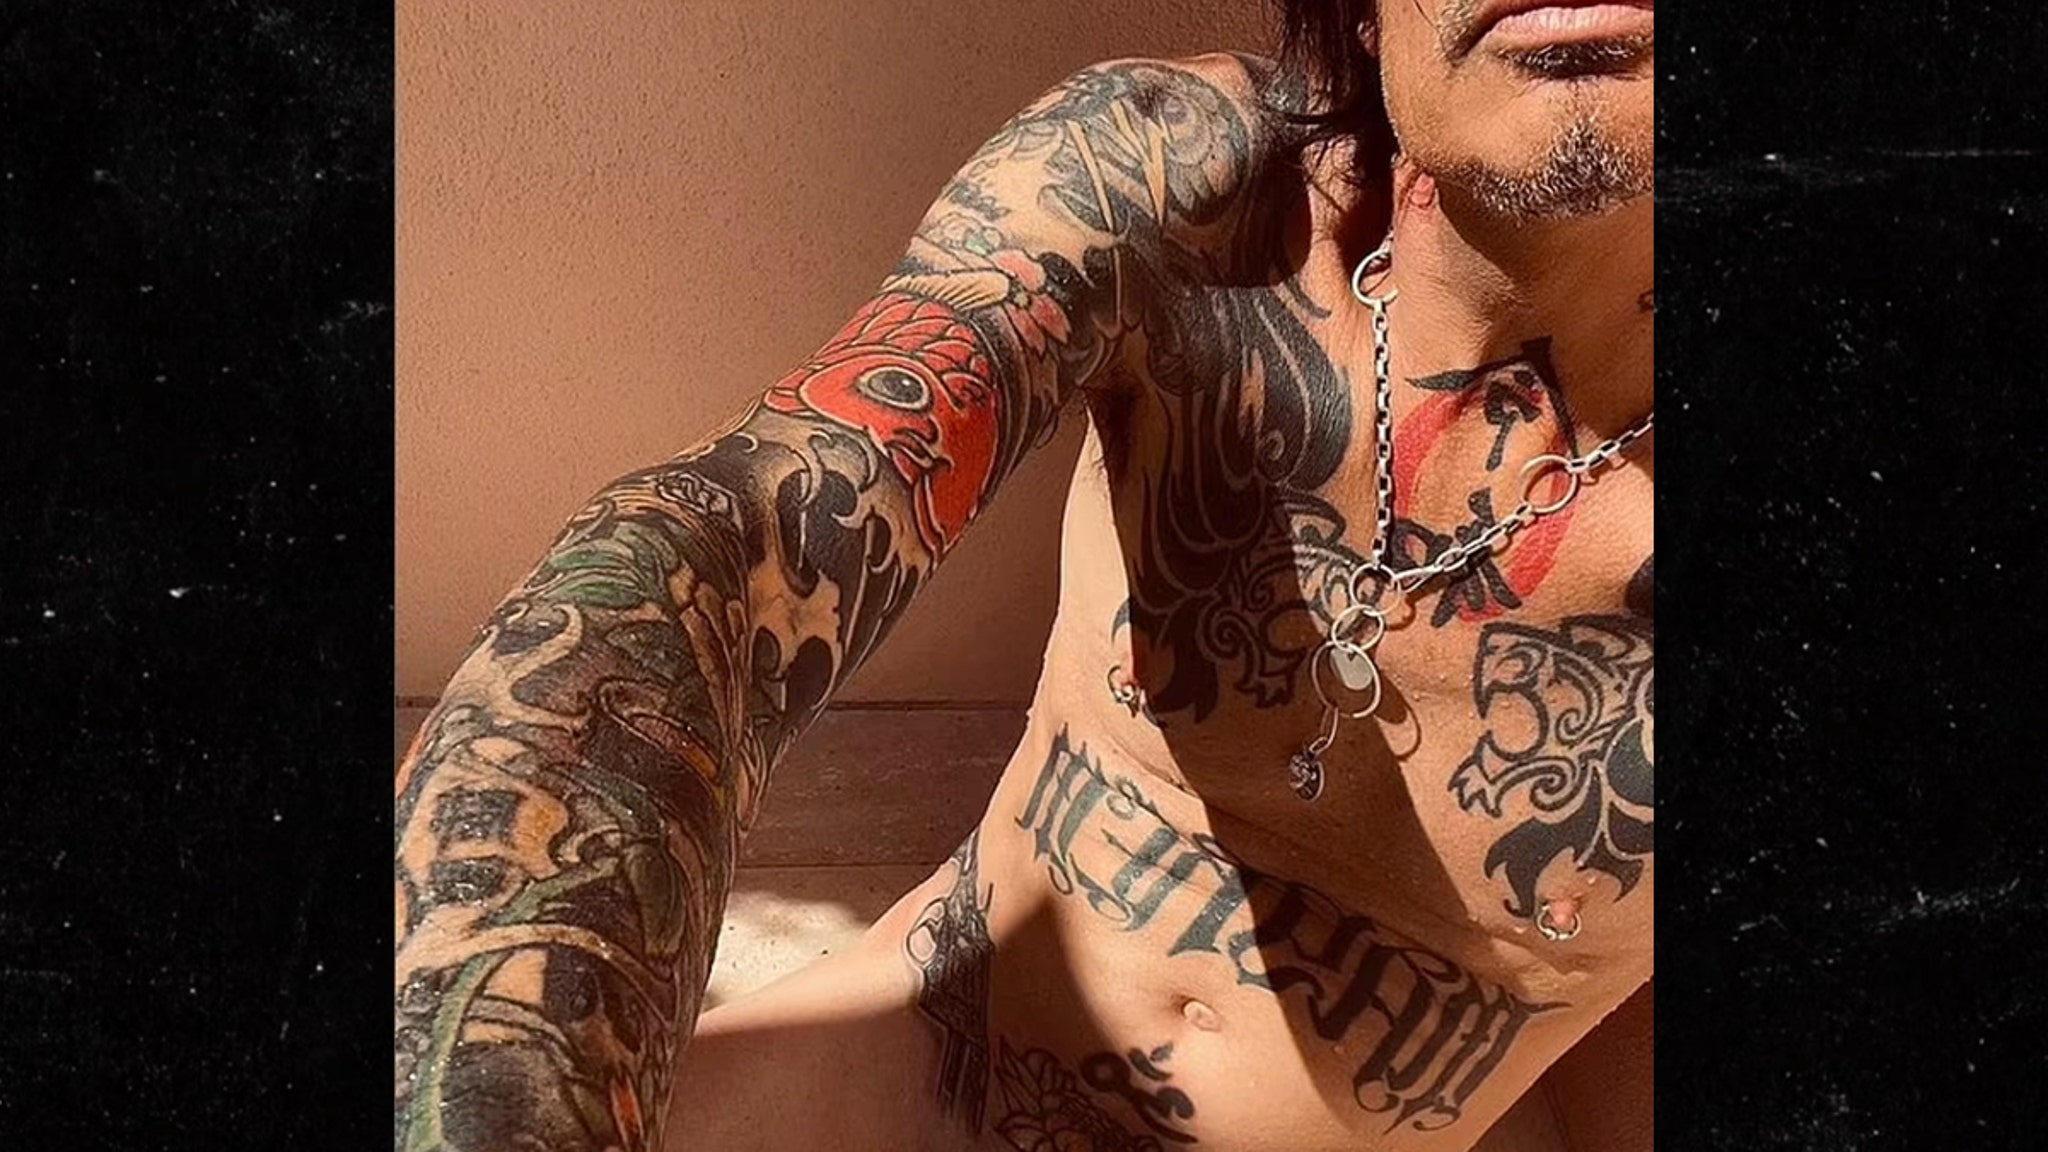 Tommy Lee Post Full Frontal Nude Pic On…